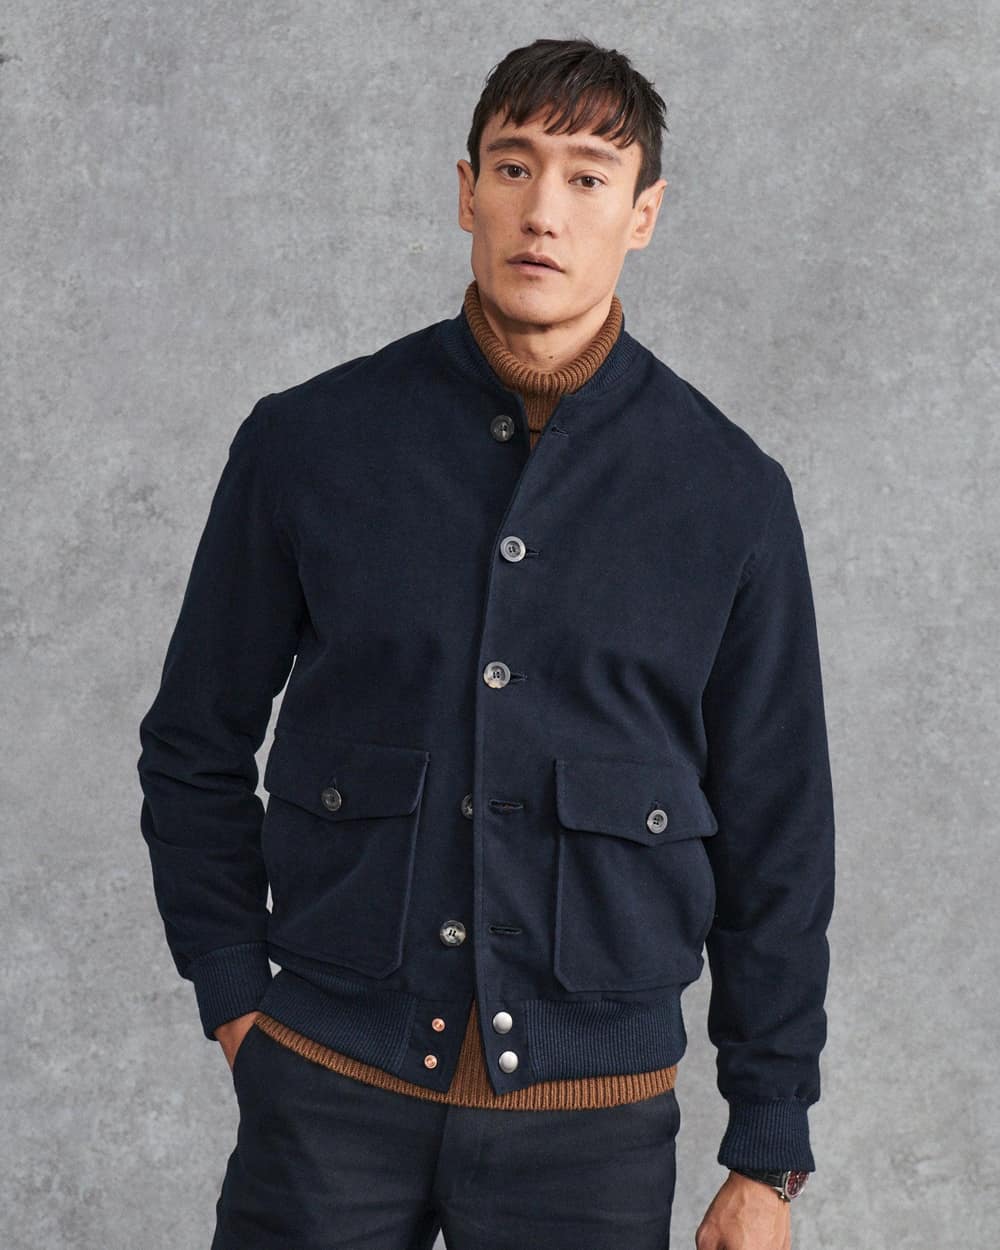 Bomber Jacket Outfits: 19 Cool Looks All Men Can Wear